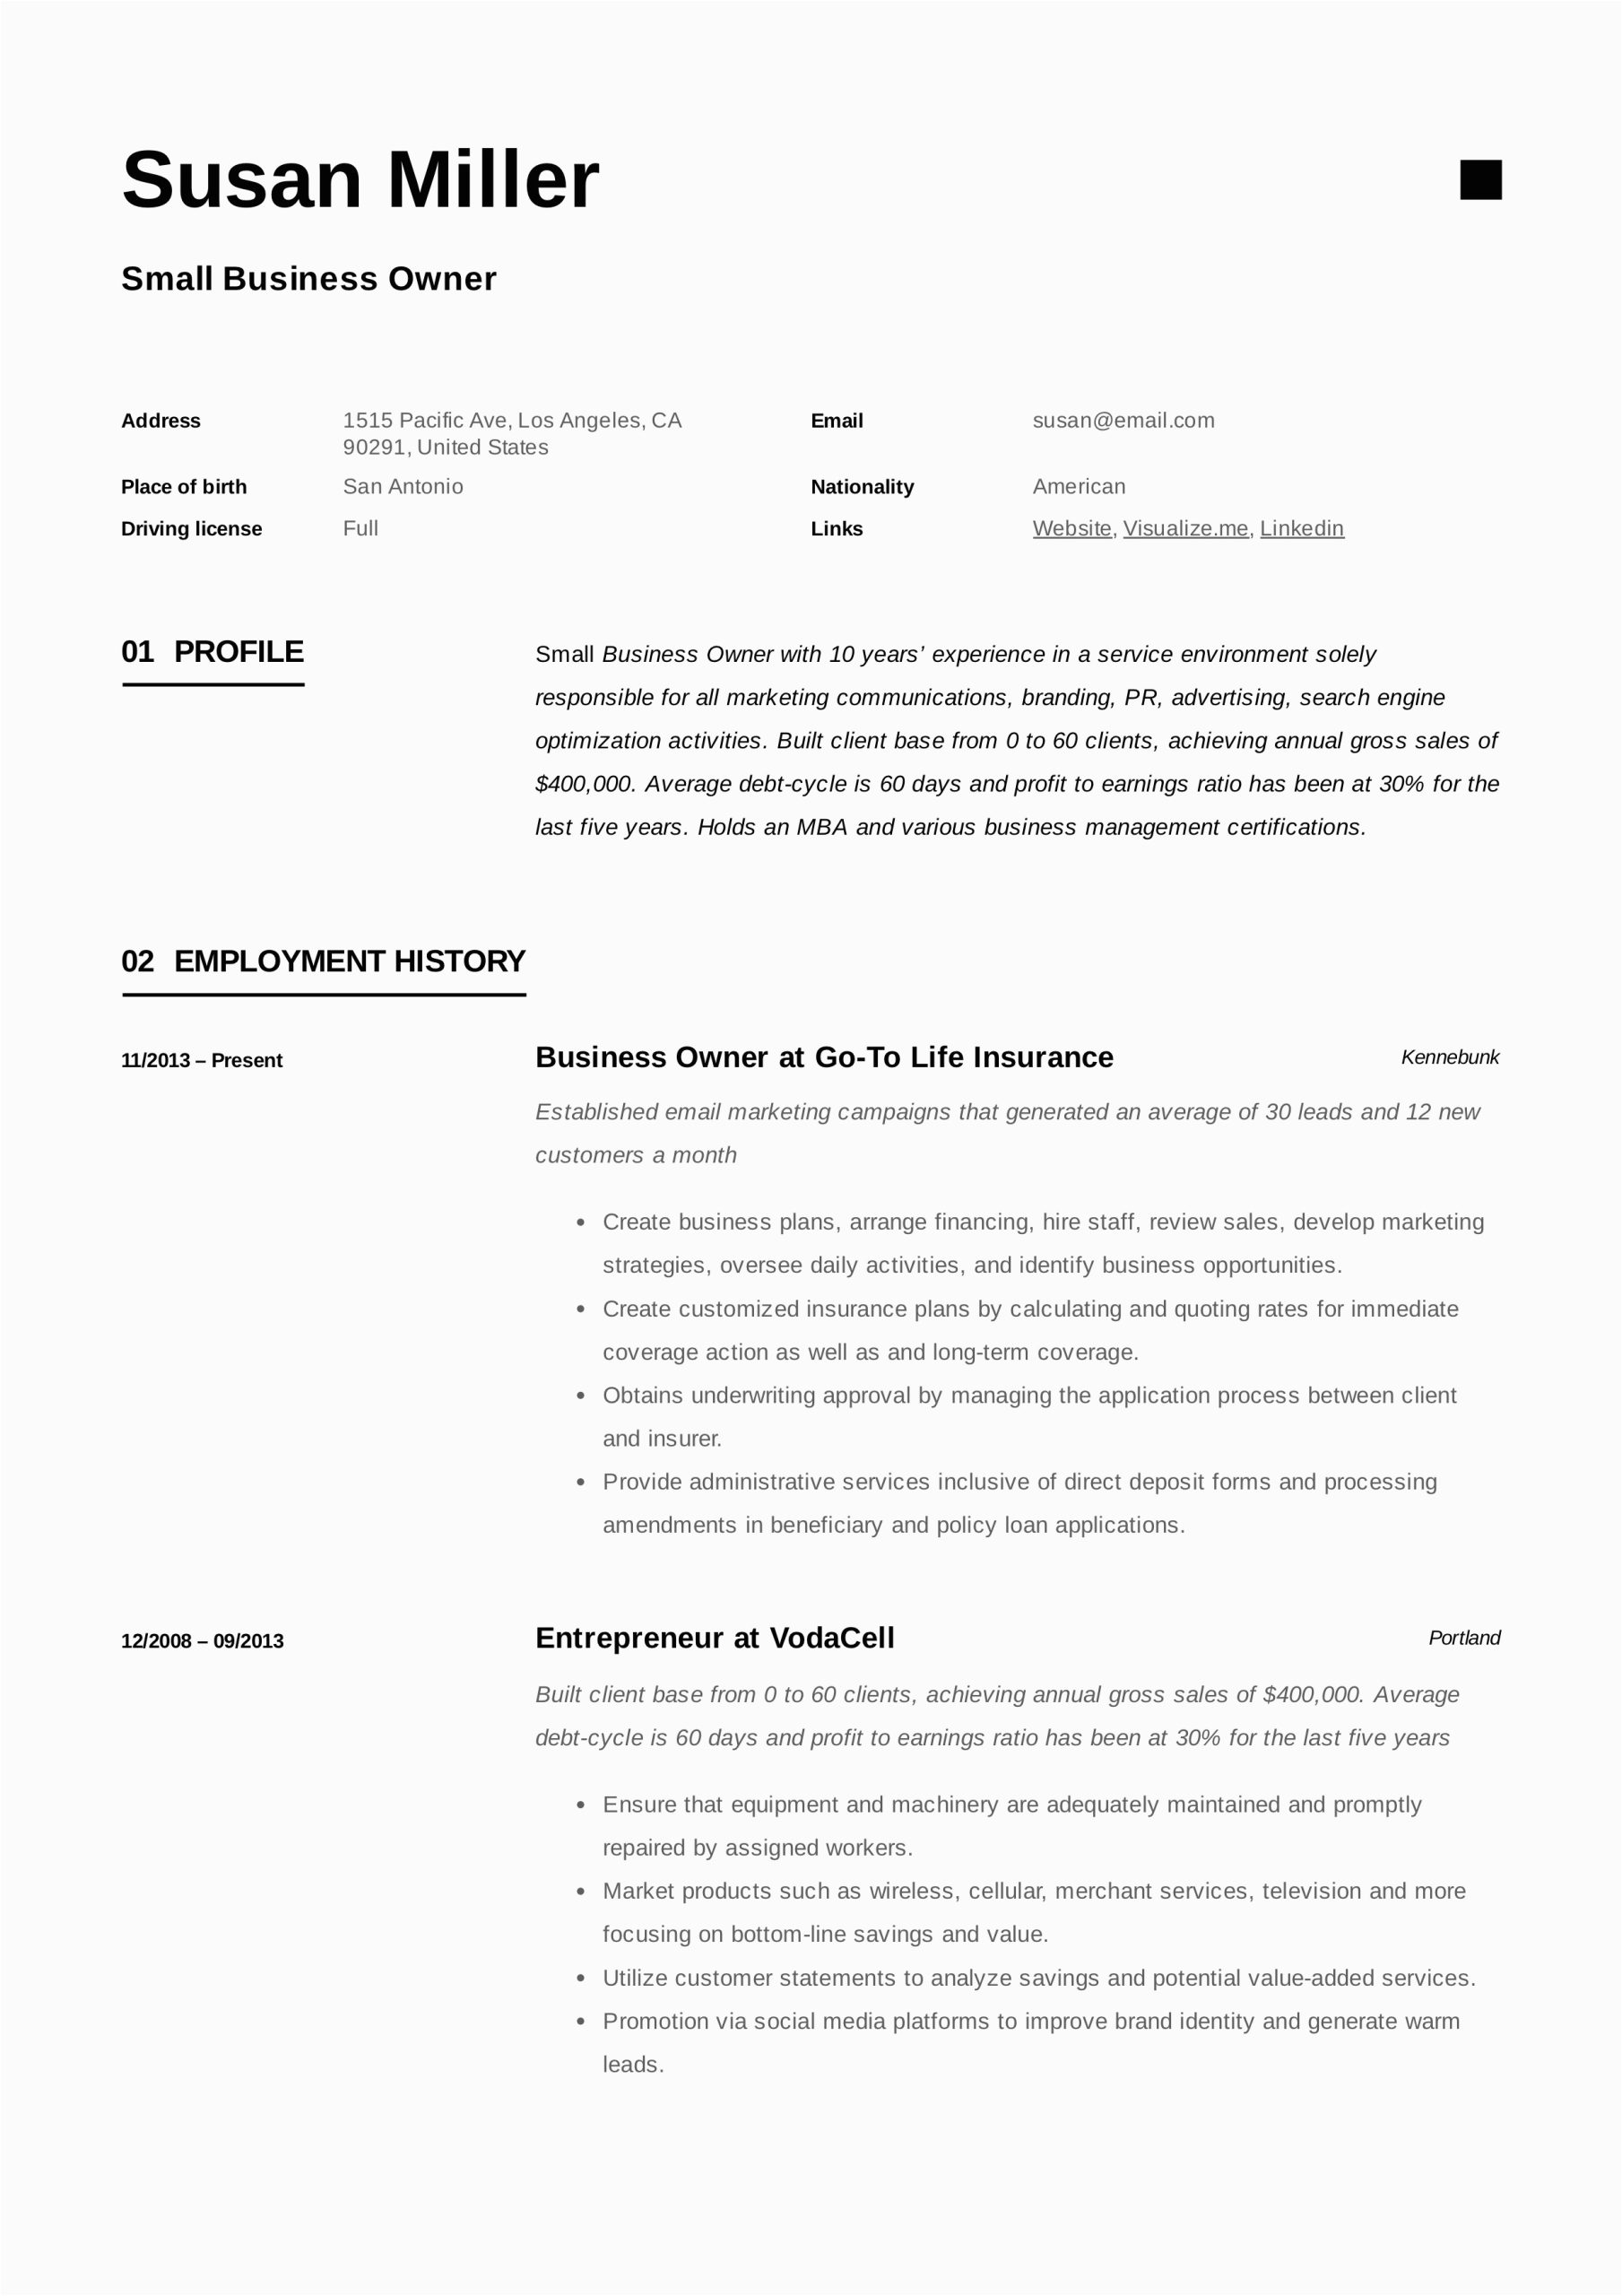 Small Business Owner On My Resume Samples Small Business Owner Resume Guide 19 Examples Pdf